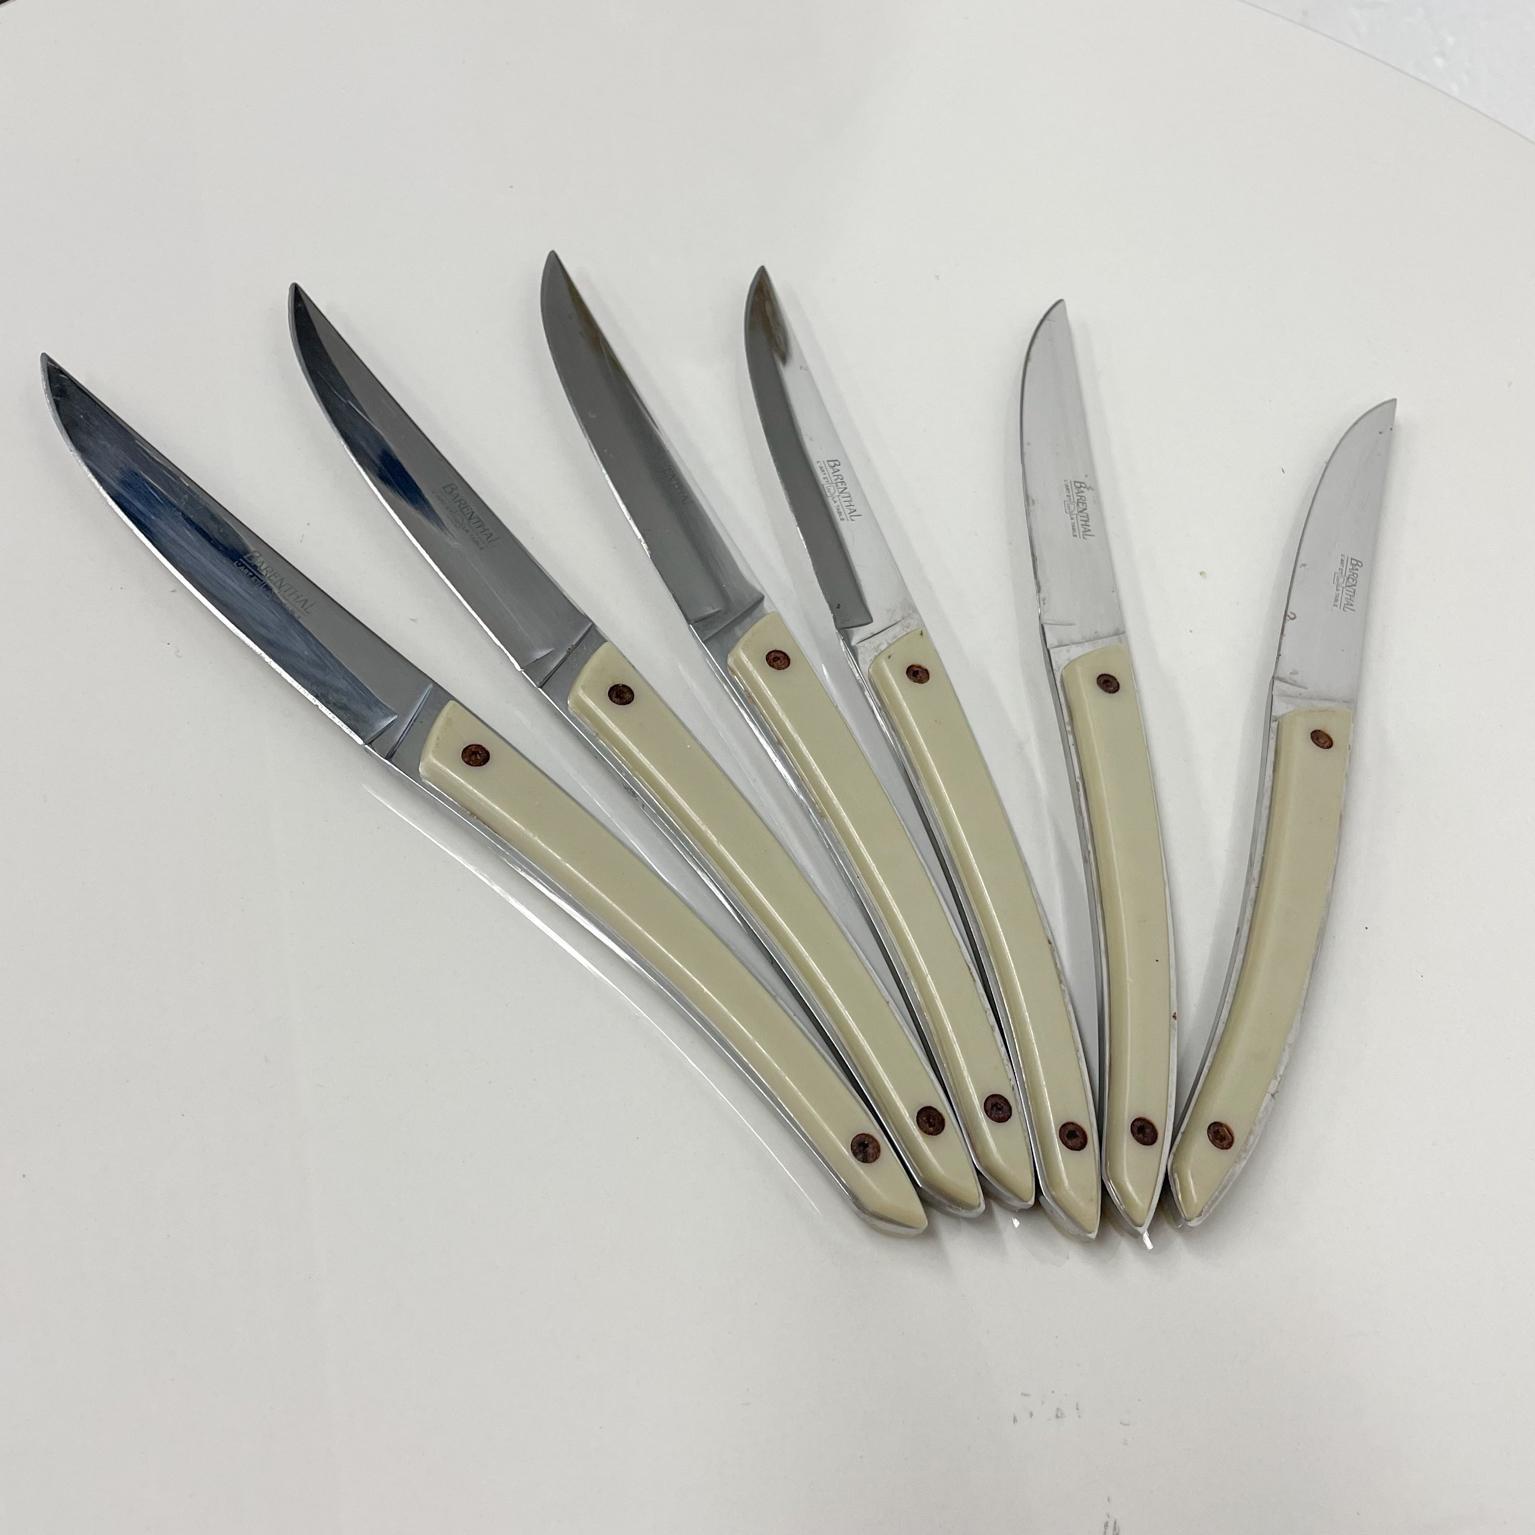 Knives
Set of 6 Vintage Laguiole Steak Knives designed by Jean Dubost
Stainless Steel with Ivory Colored Handle
9.13 L x .75 h x .5 d inches
Preowned original unrestored vintage condition. No box.
Refer to images provided.